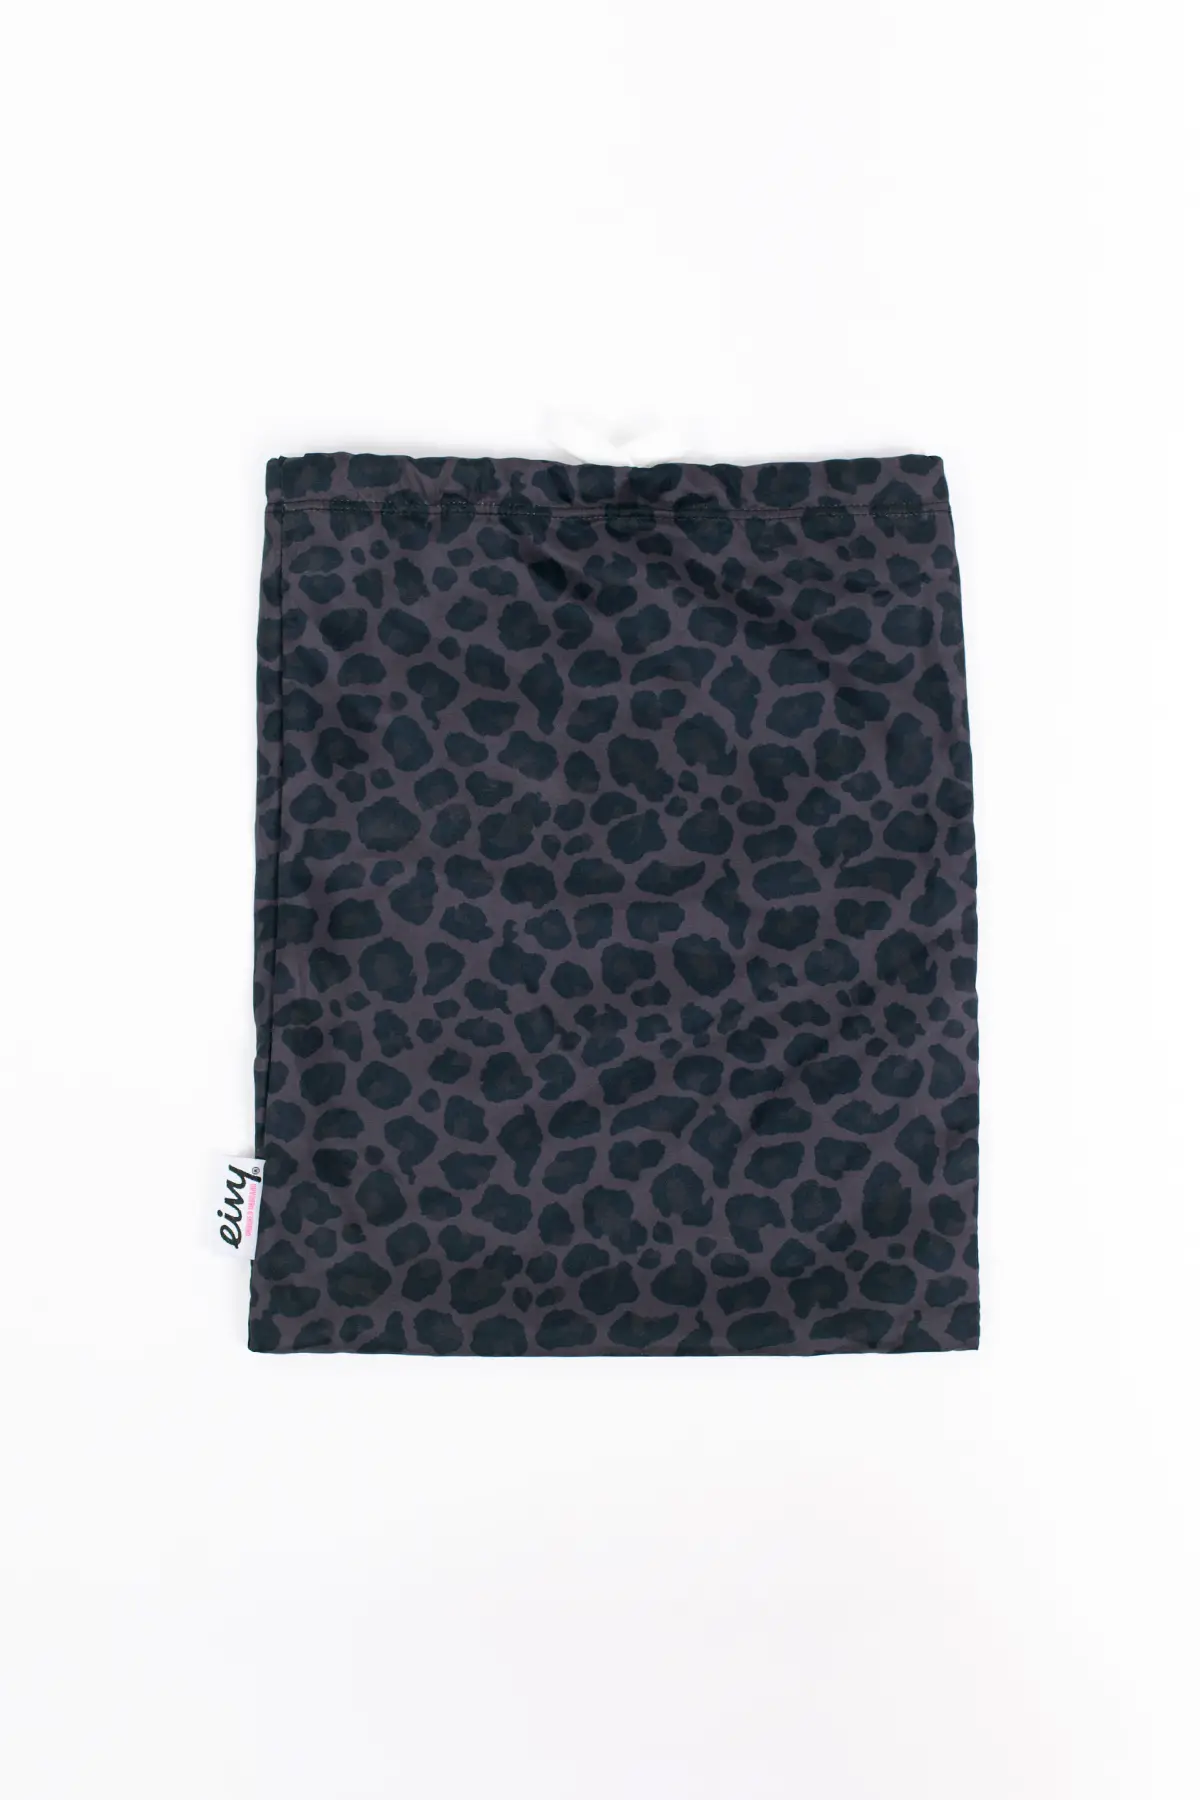 Icecold Top - Black Leopard